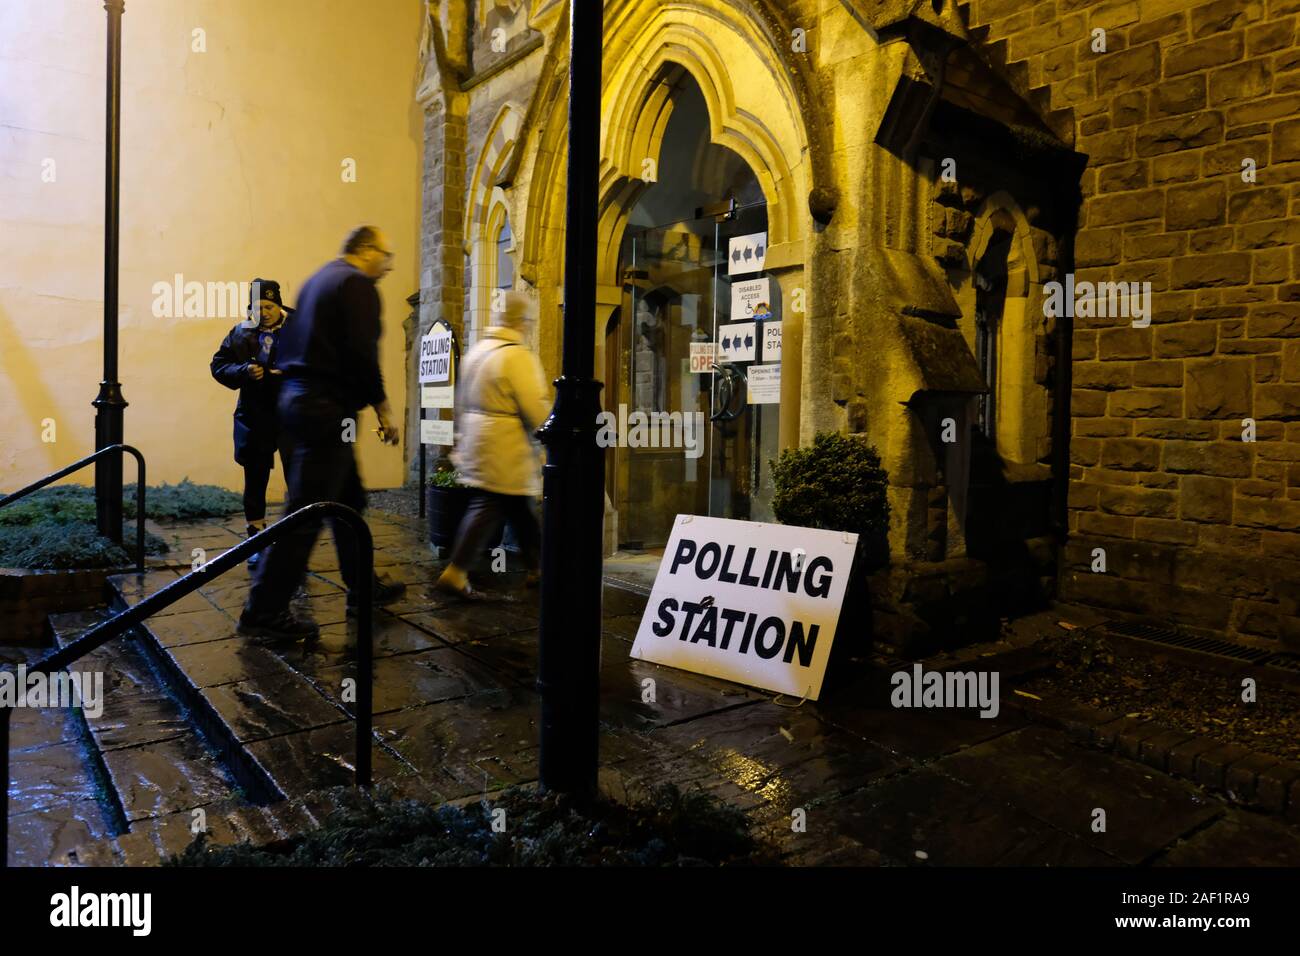 Hereford, Herefordshire, UK - Thursday 12th December 2019 - UK Election - Early morning voters arrive at a Polling Station in a church in Hereford on a cold dark and wet winter morning just after opening at 7AM. Photo Steven May / Alamy Live News Stock Photo